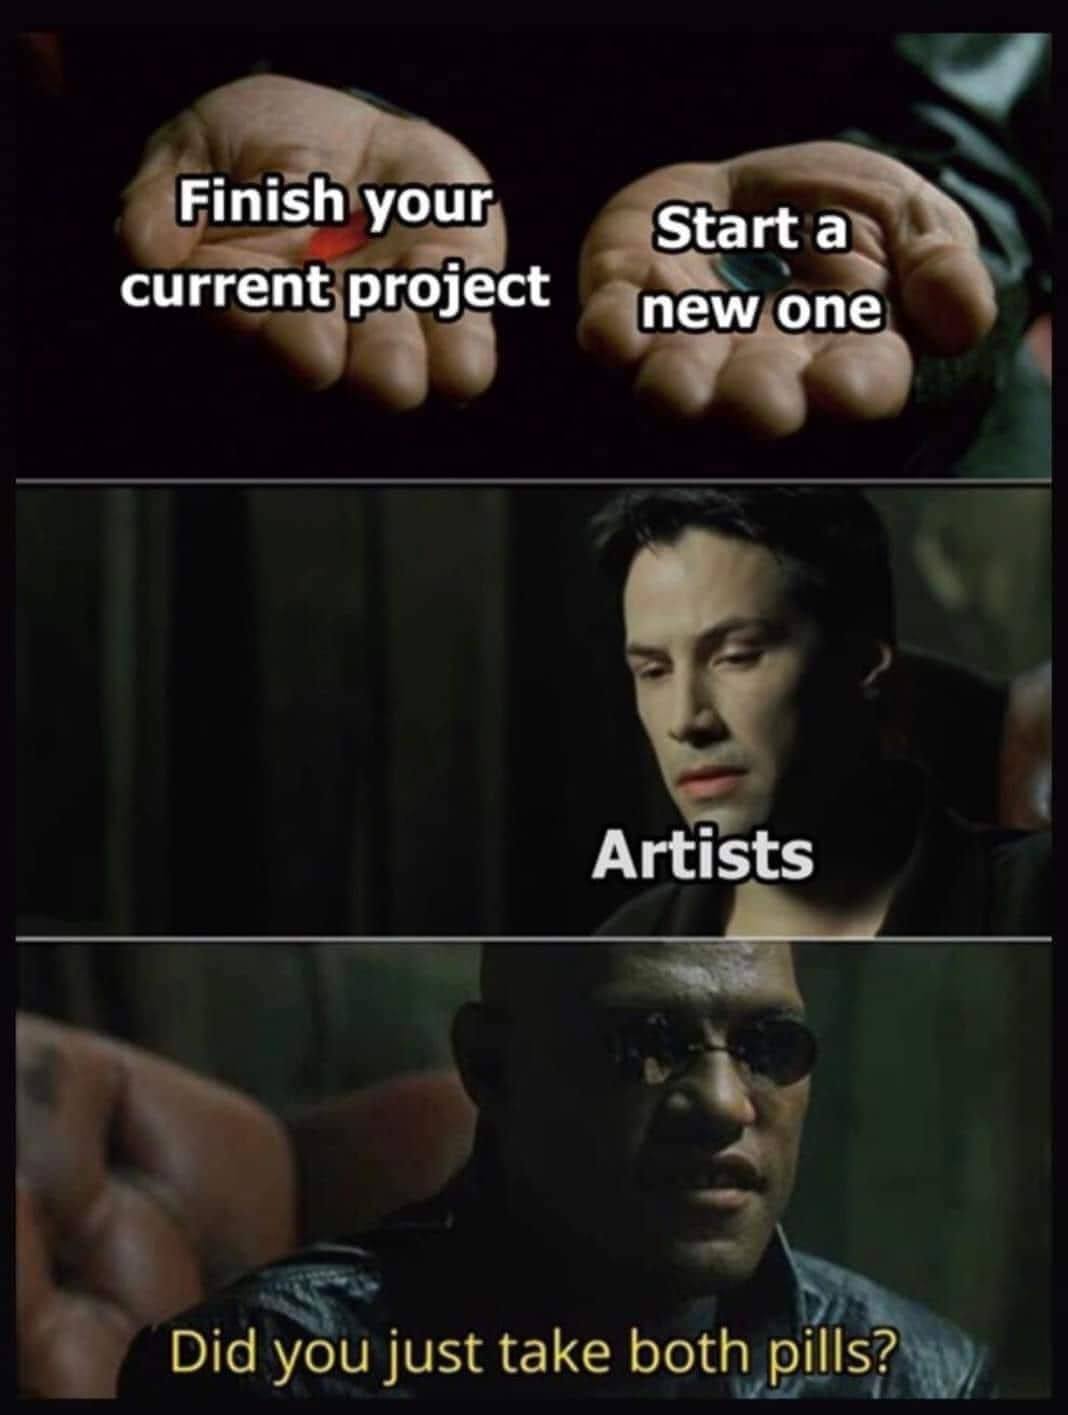 red pill or blue pill, finish your current project, start a new one, artists, did you just take both pills?, the matrix, morpheus, neo, meme